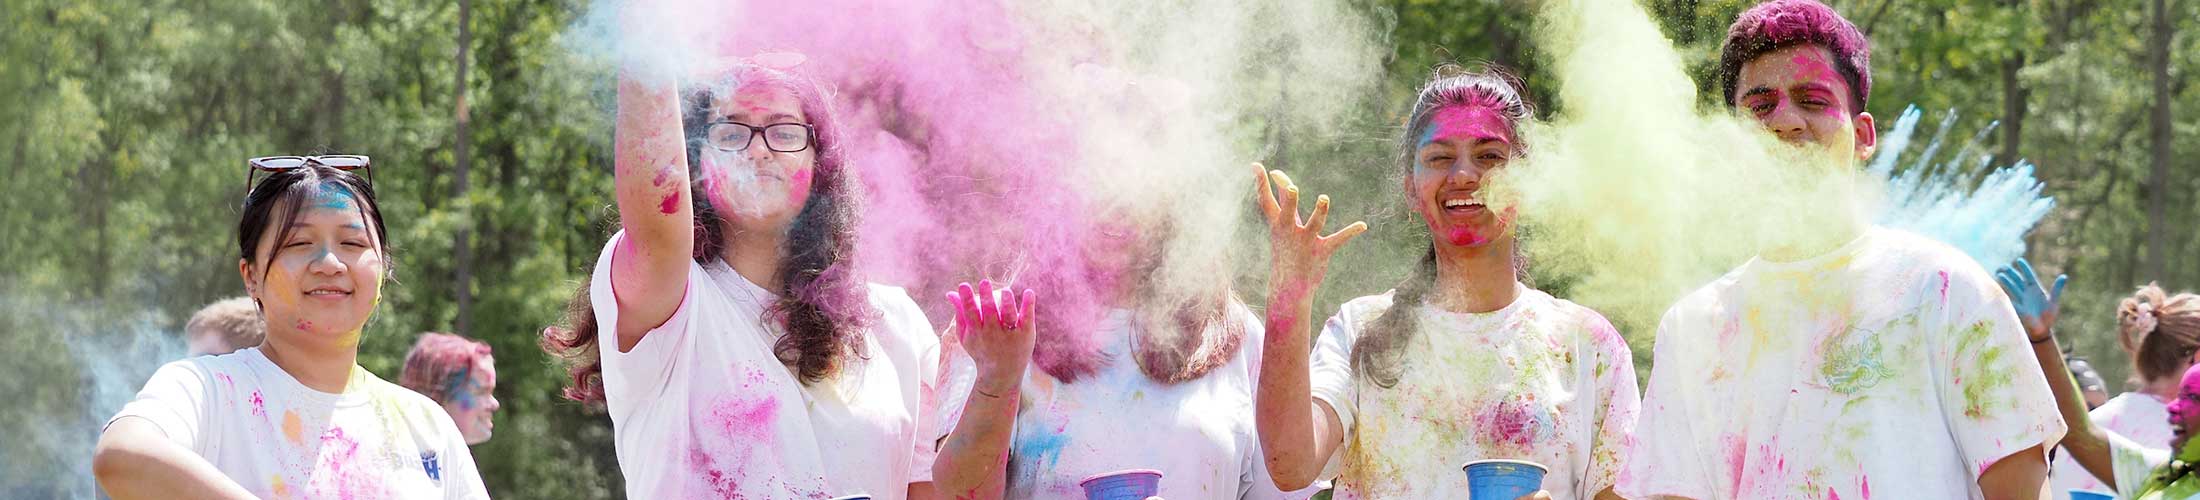 Students throwing up color at holi fest.